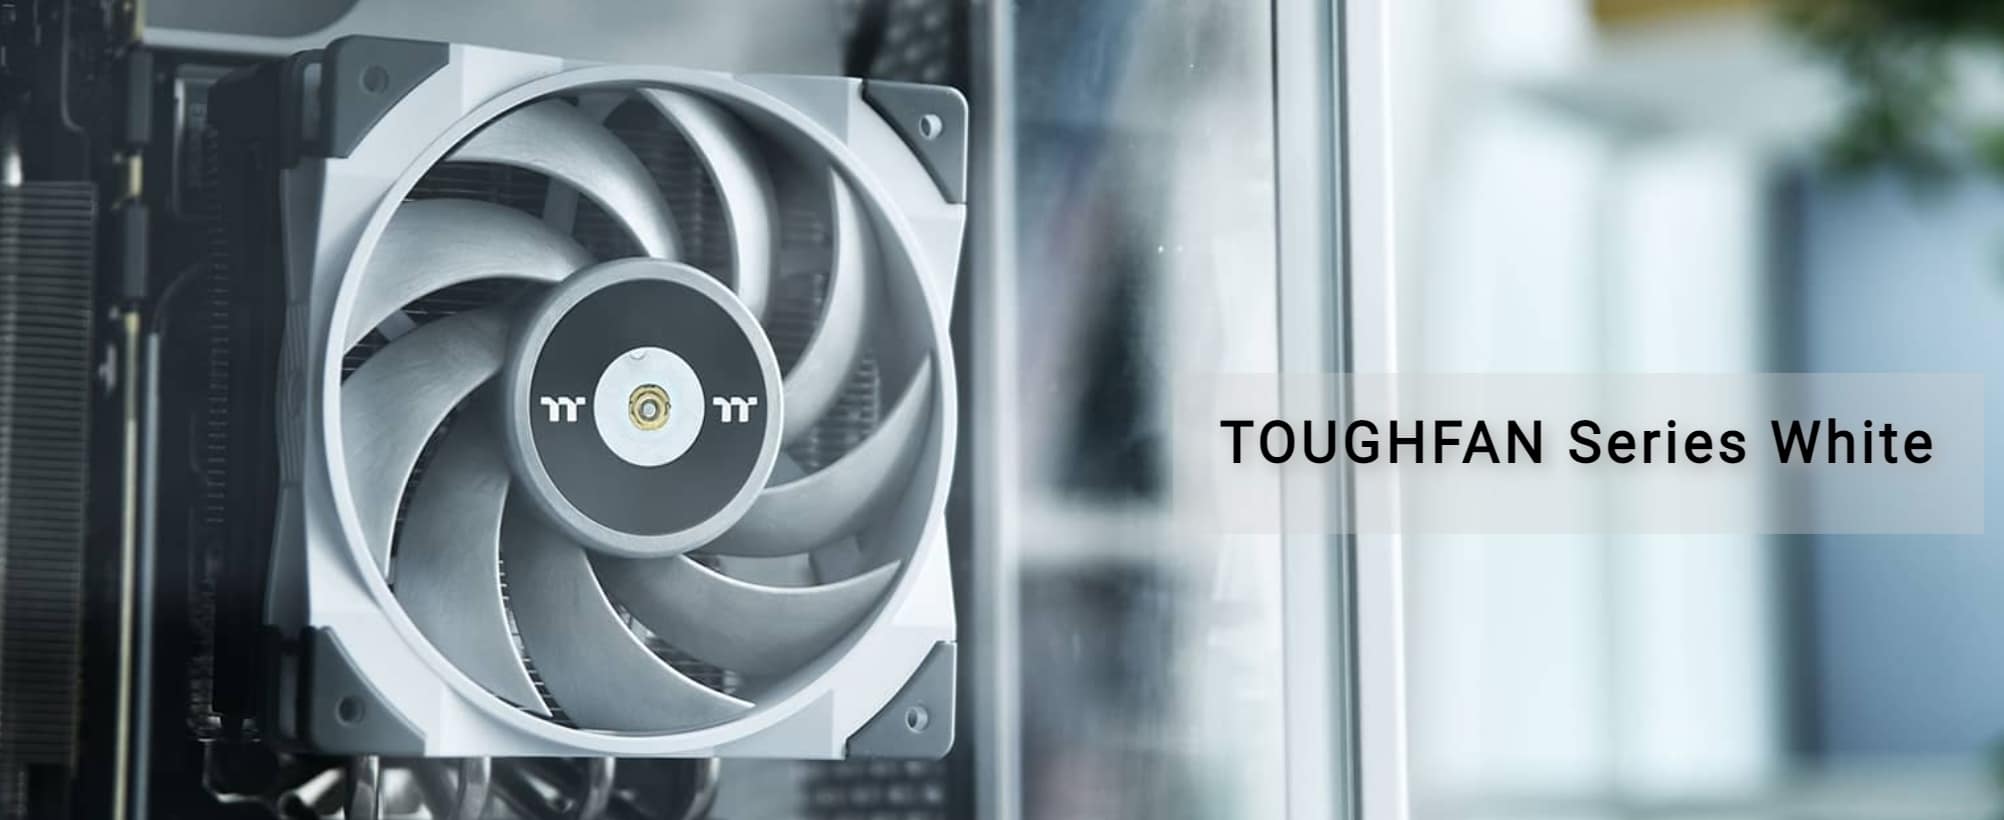 Thermaltake Introduces Its TOUGHFAN 12 White Fans